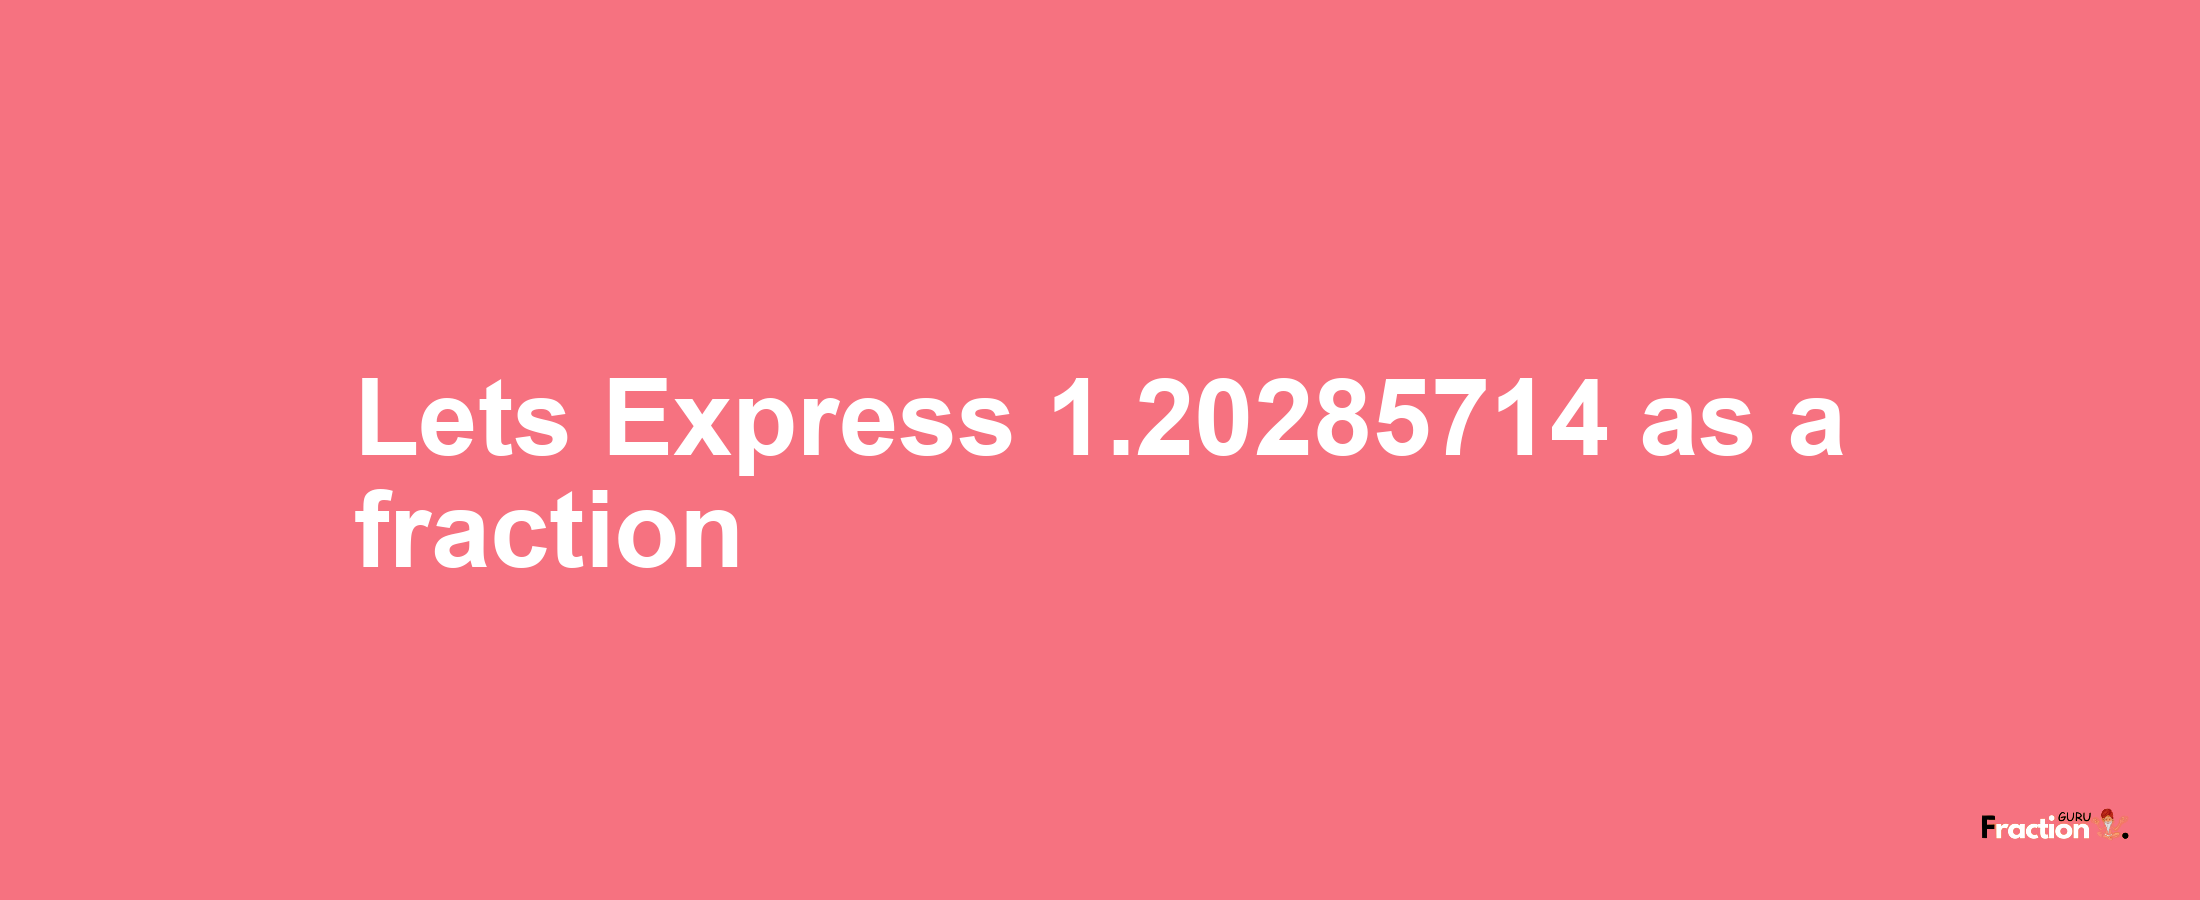 Lets Express 1.20285714 as afraction